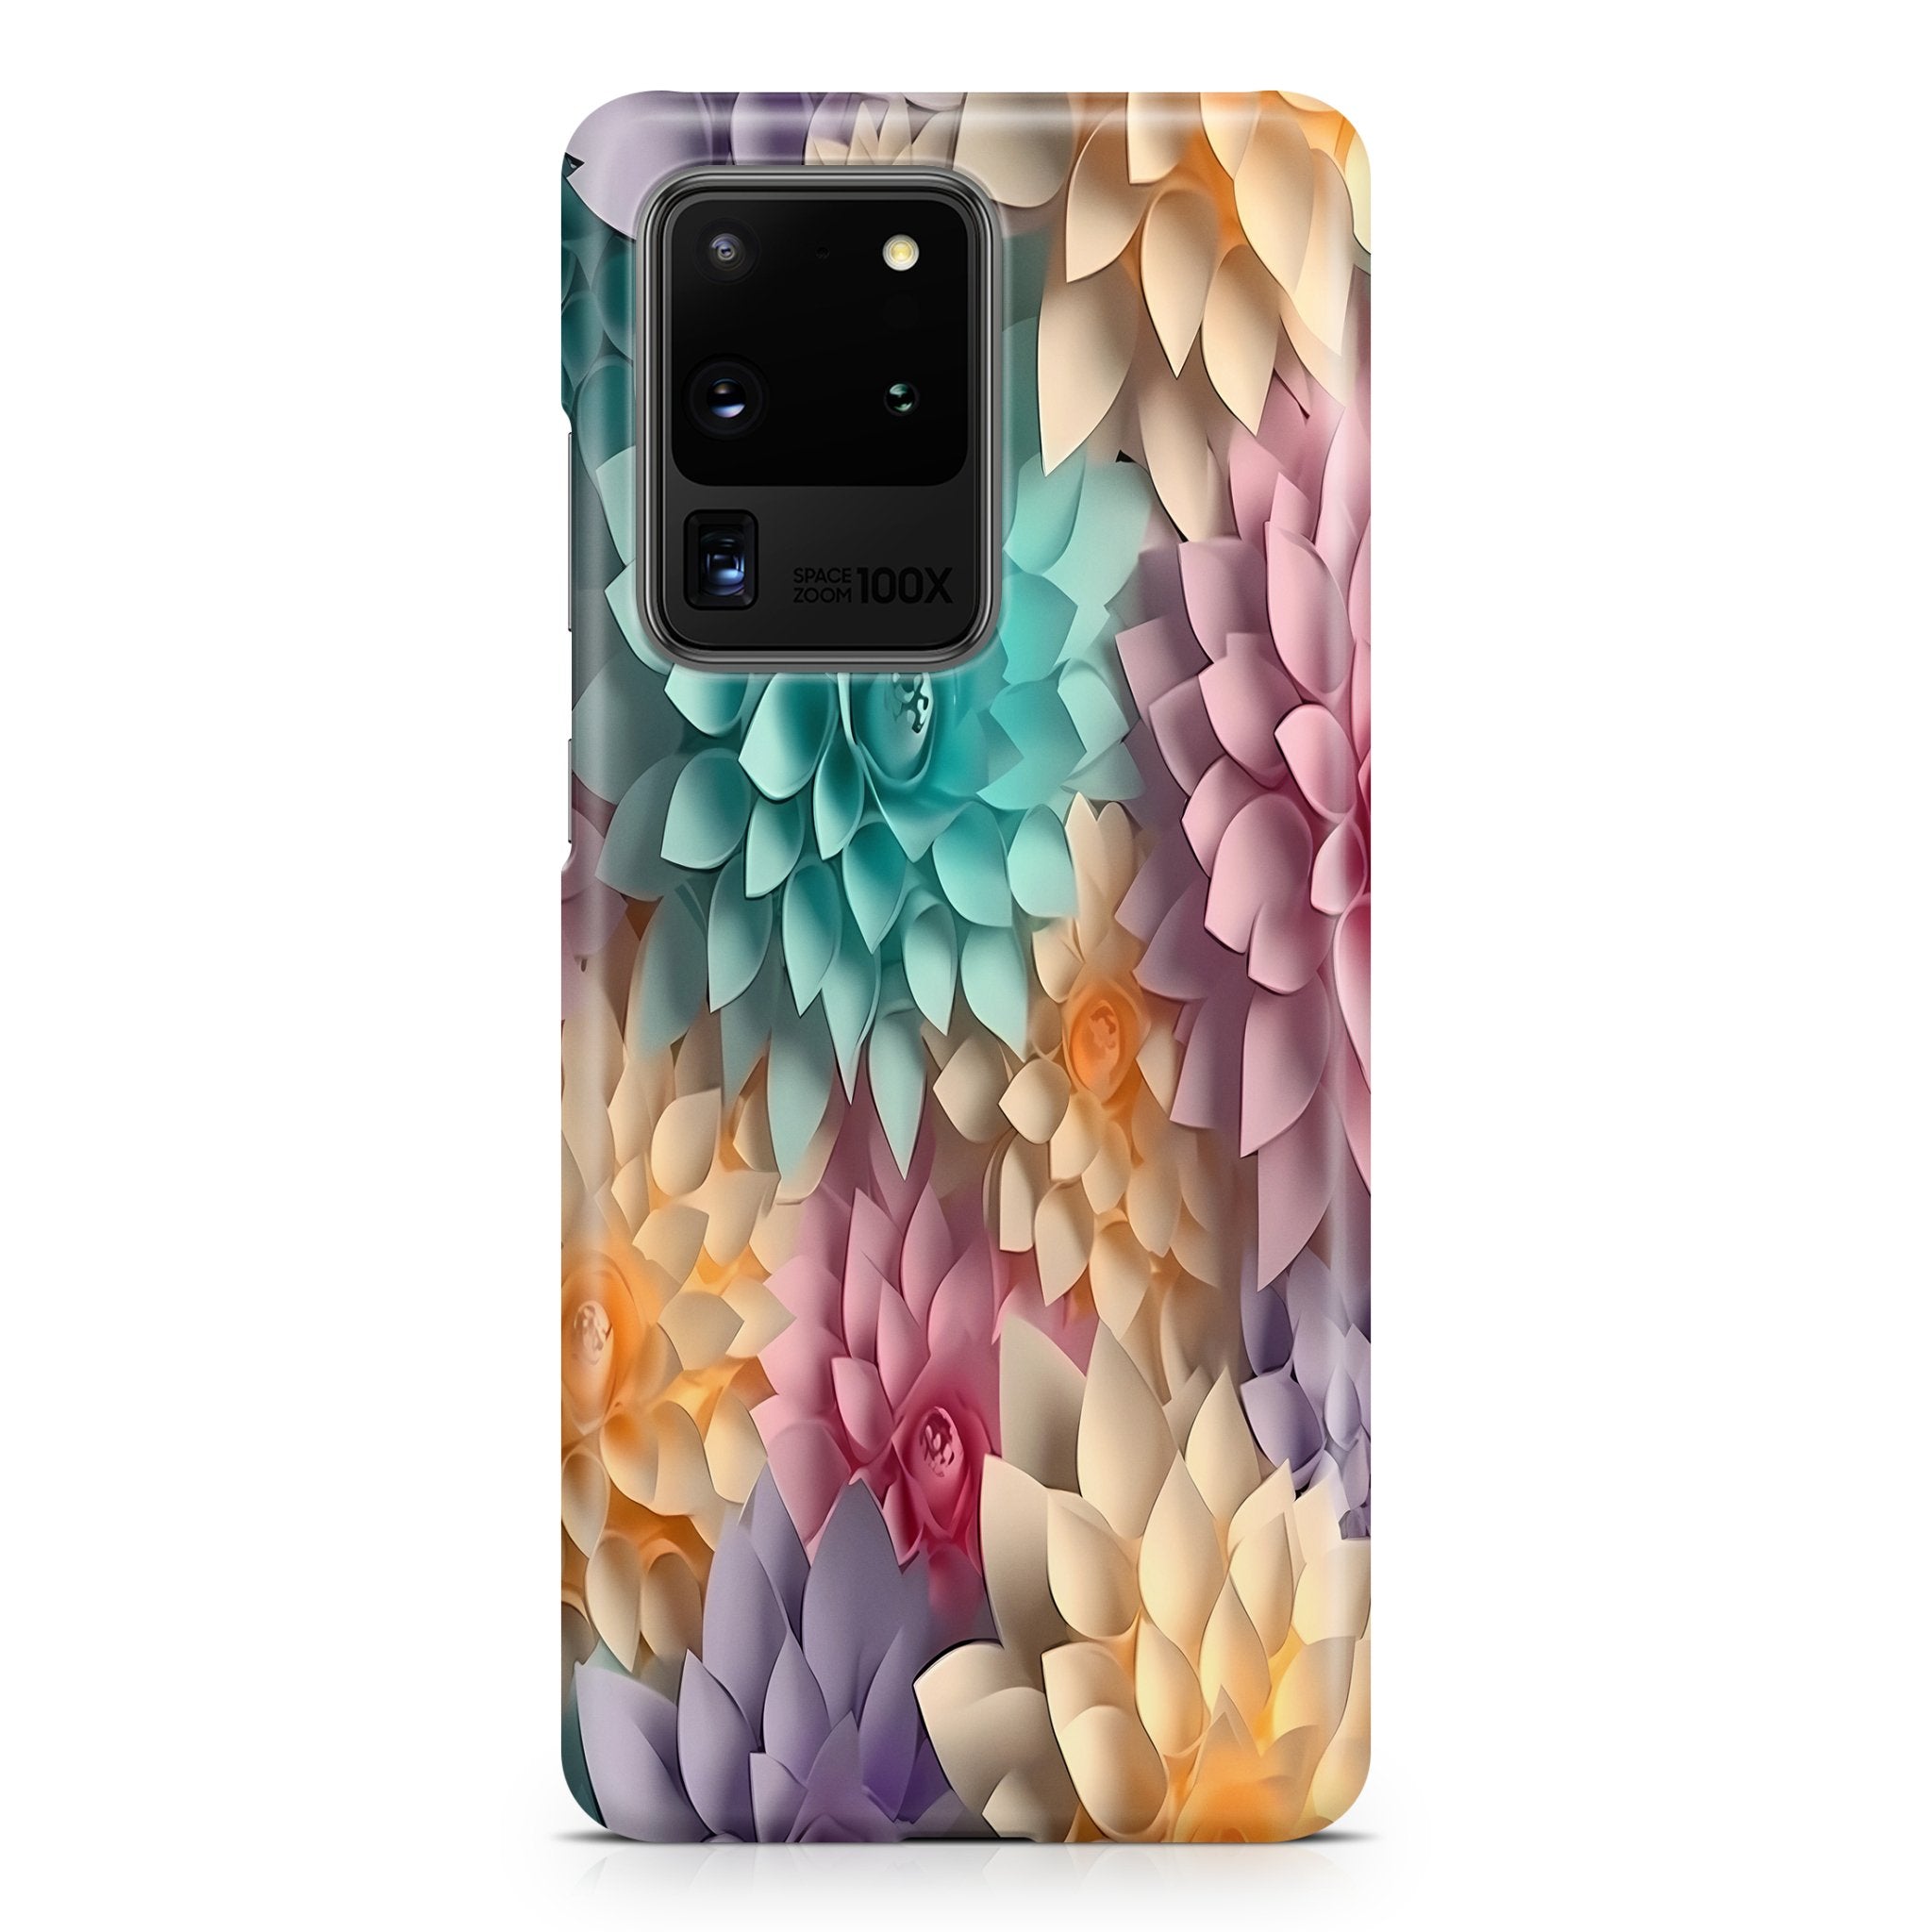 Pastel Symphony - Samsung phone case designs by CaseSwagger